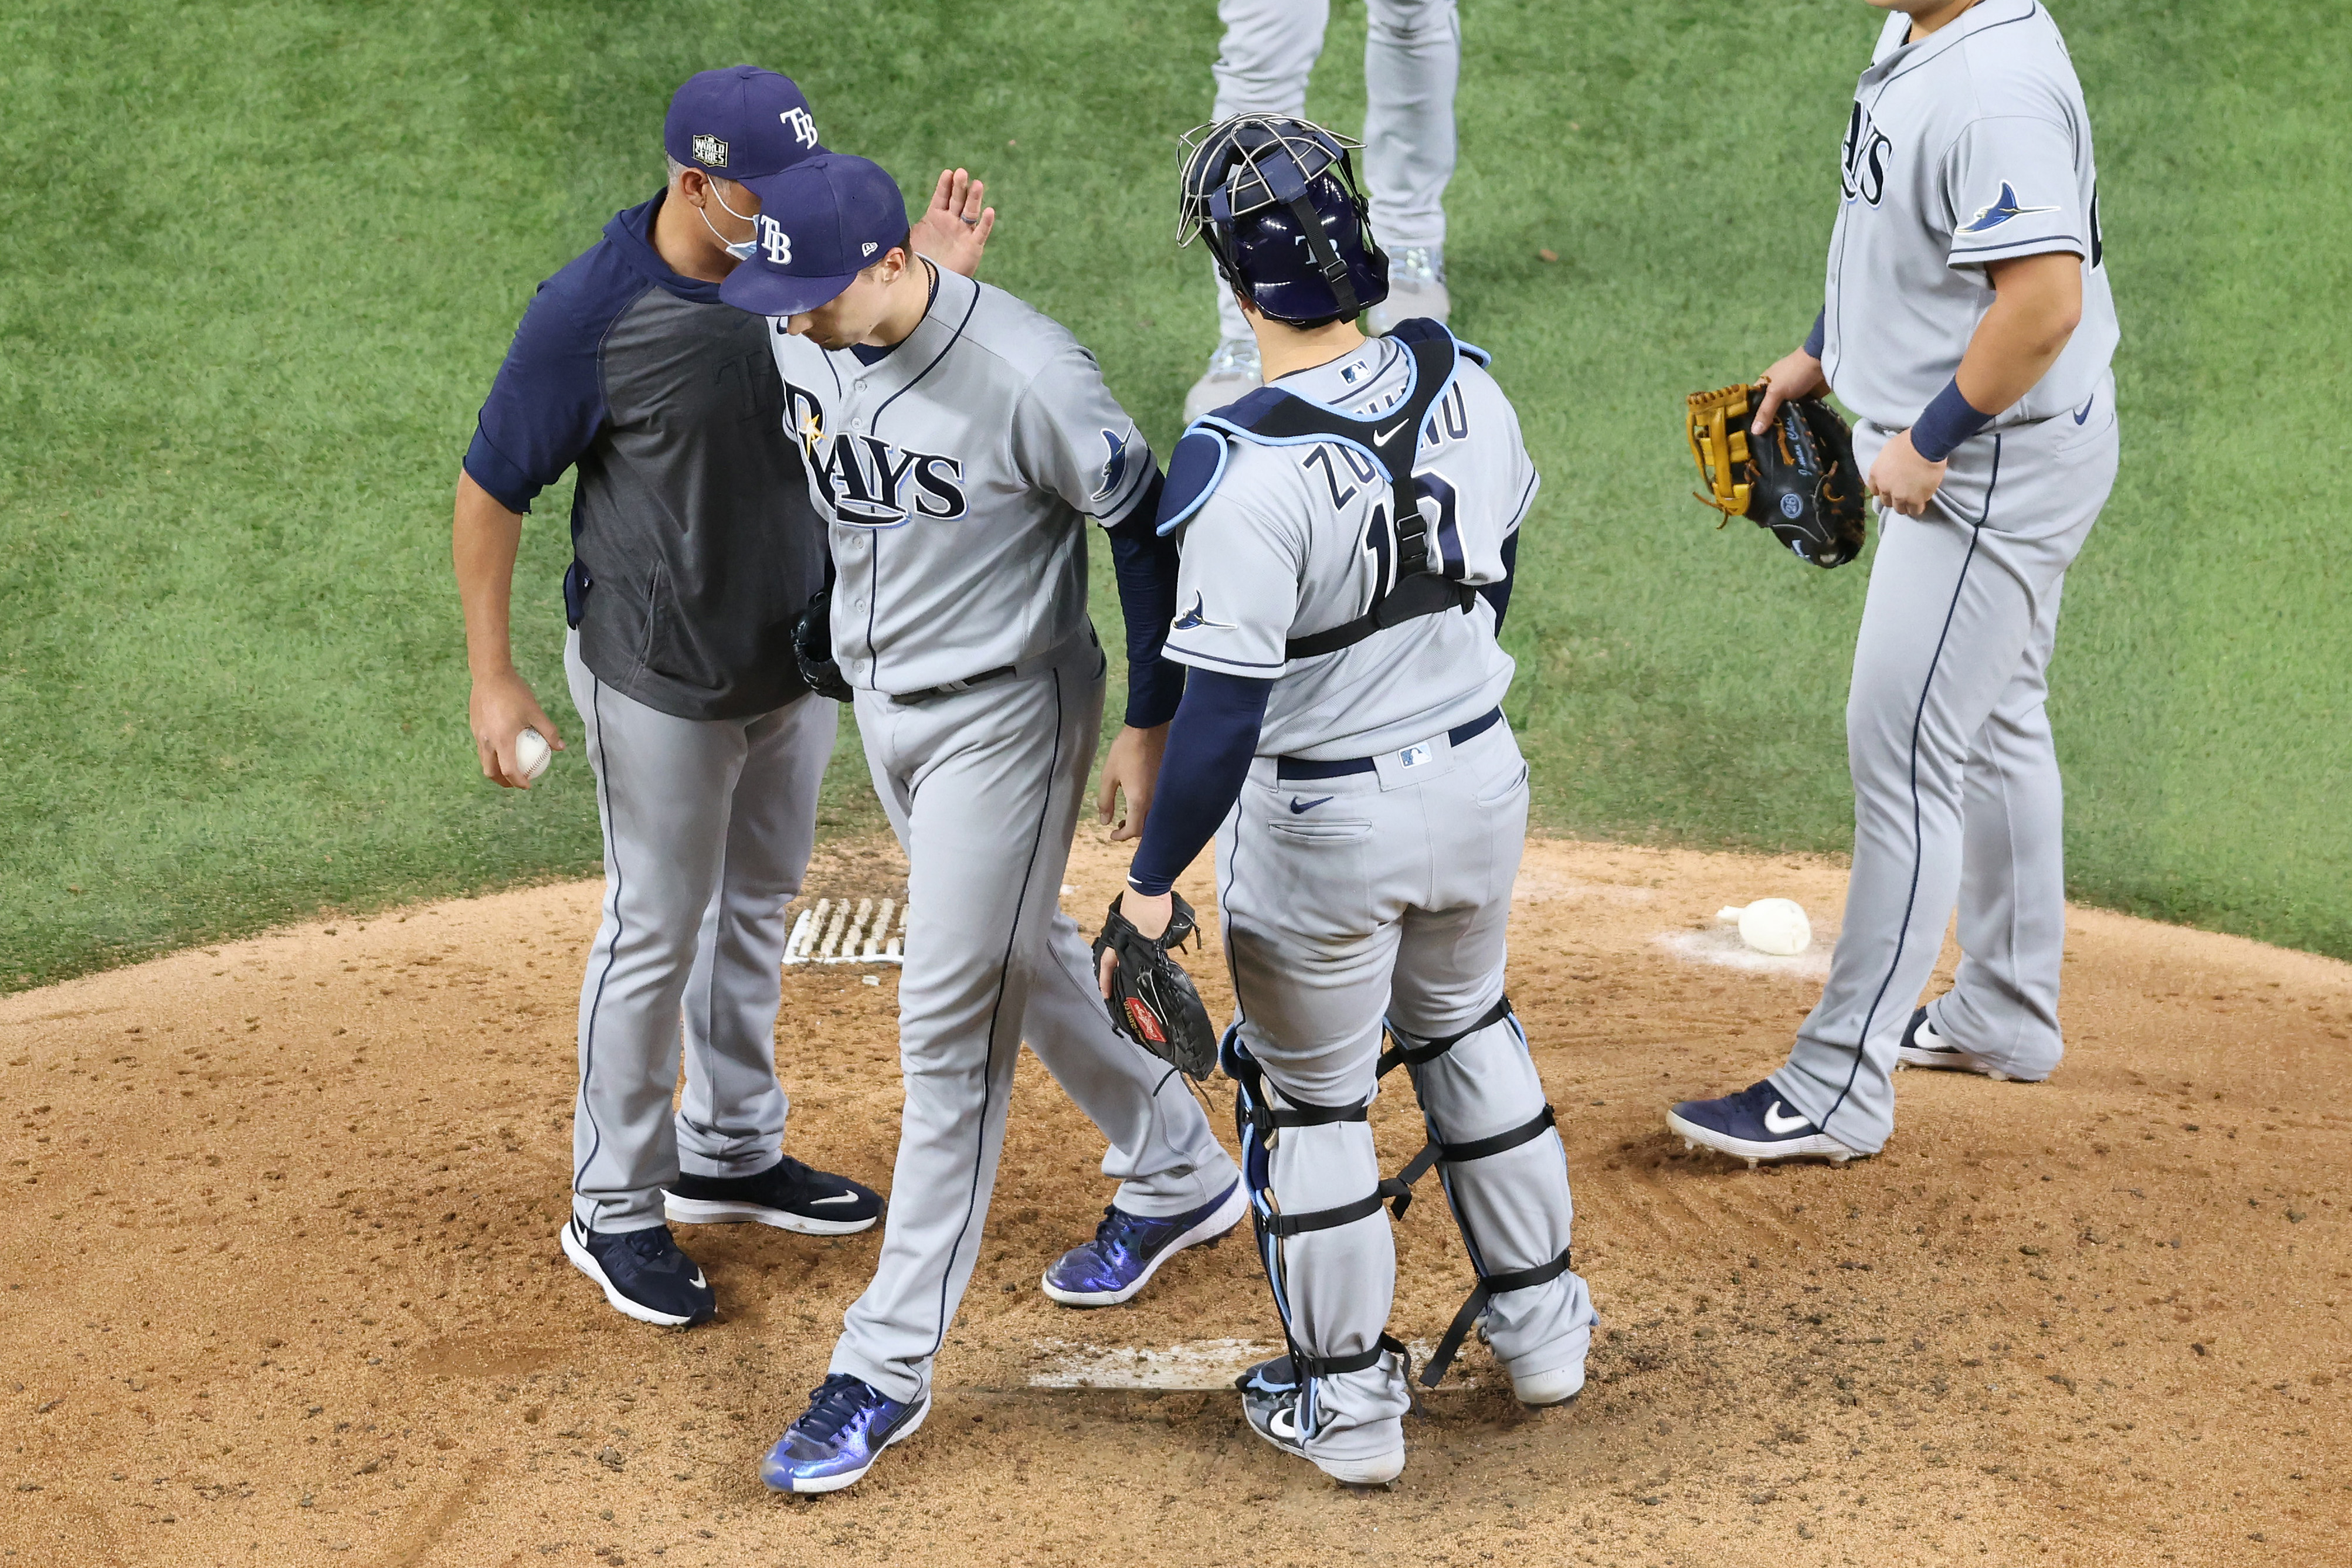 Pulling Blake Snell in Game 6 of the World Series was not the finest hour  for MLB's analytics crowd - The Boston Globe